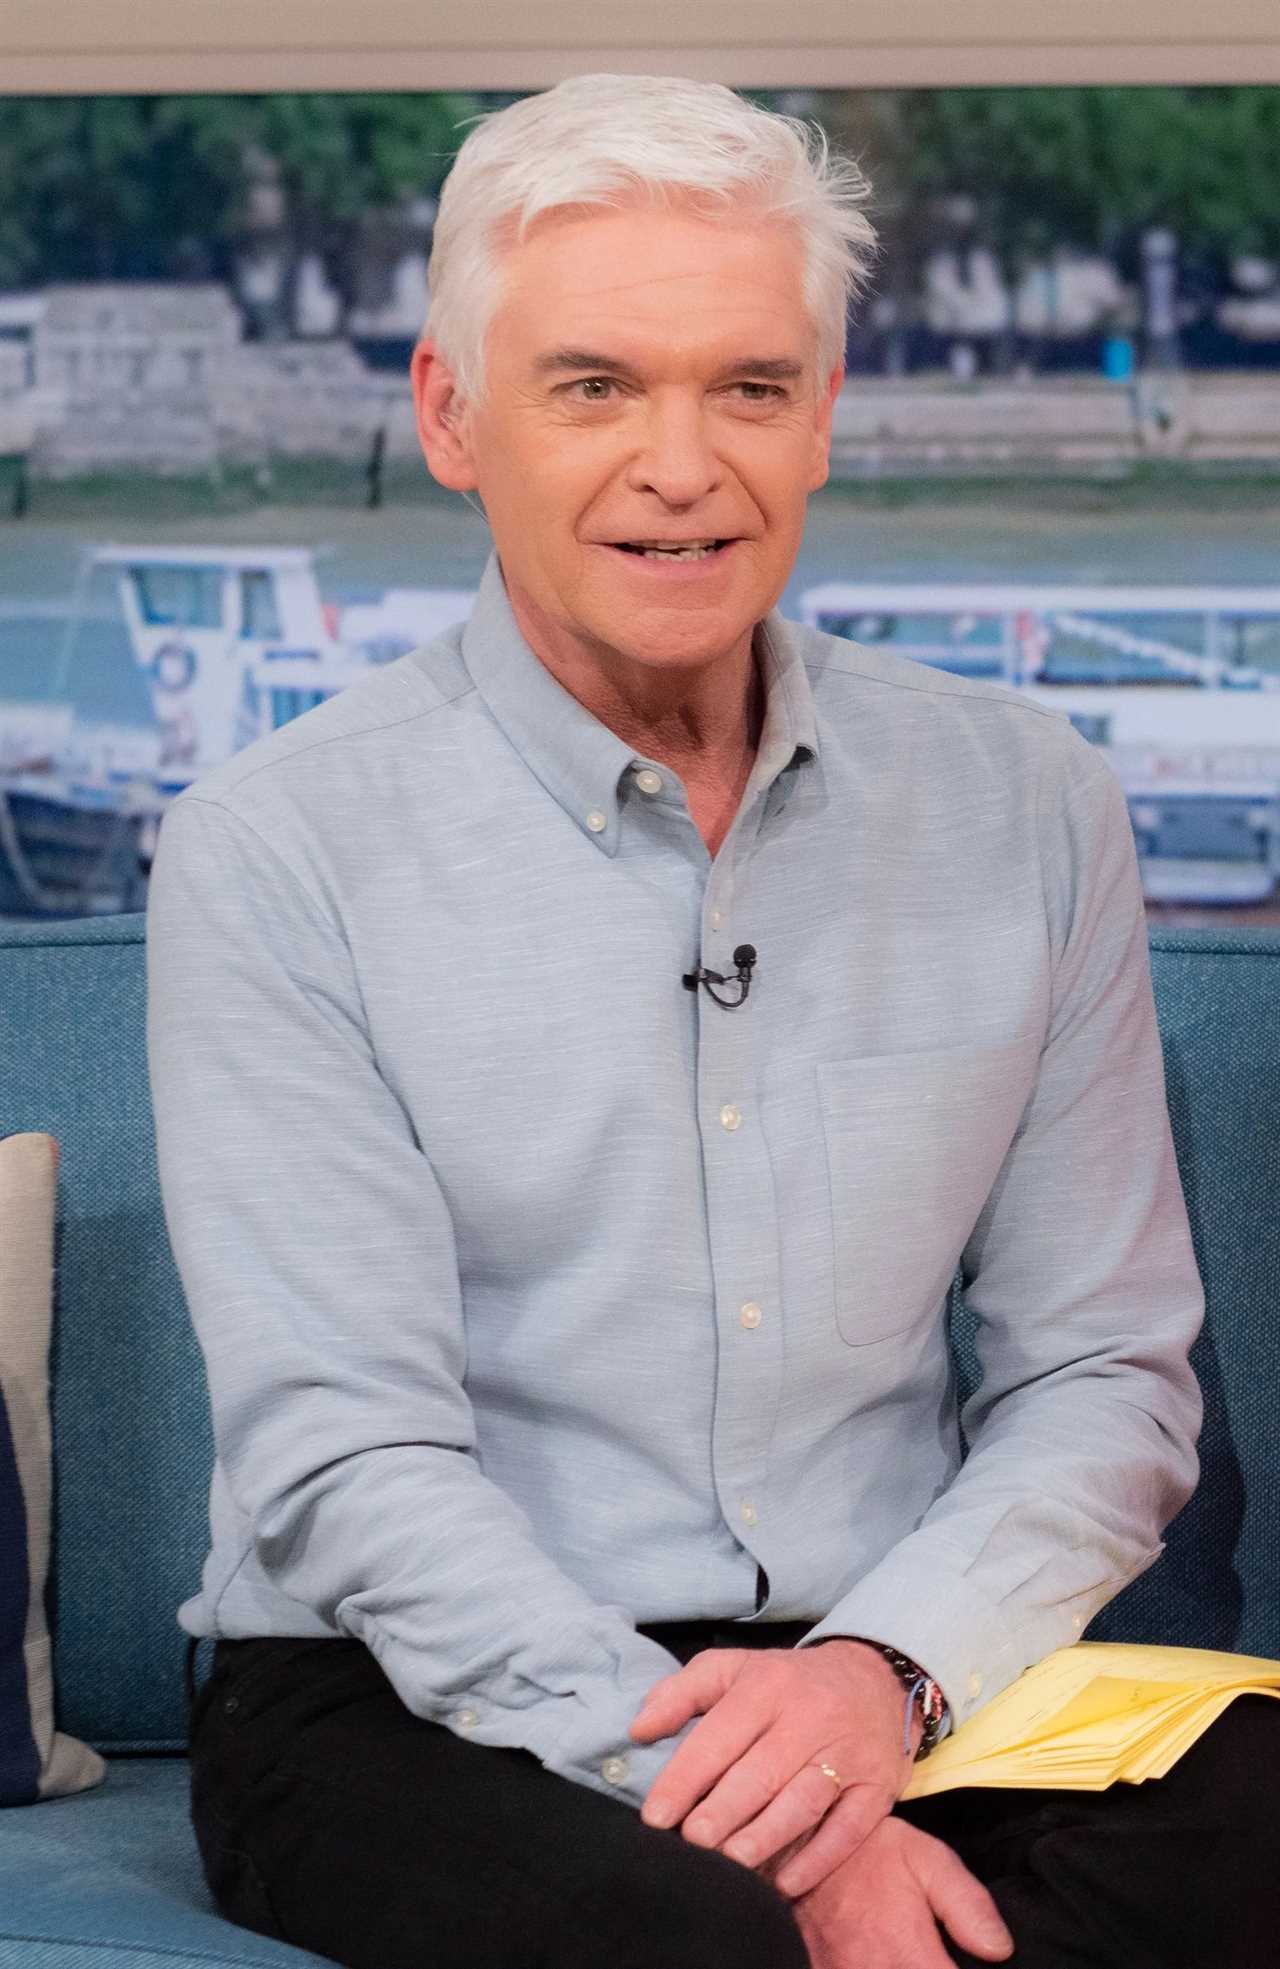 Nadine Dorries reveals how Phillip Schofield ‘bullied’ co-presenter on This Morning set